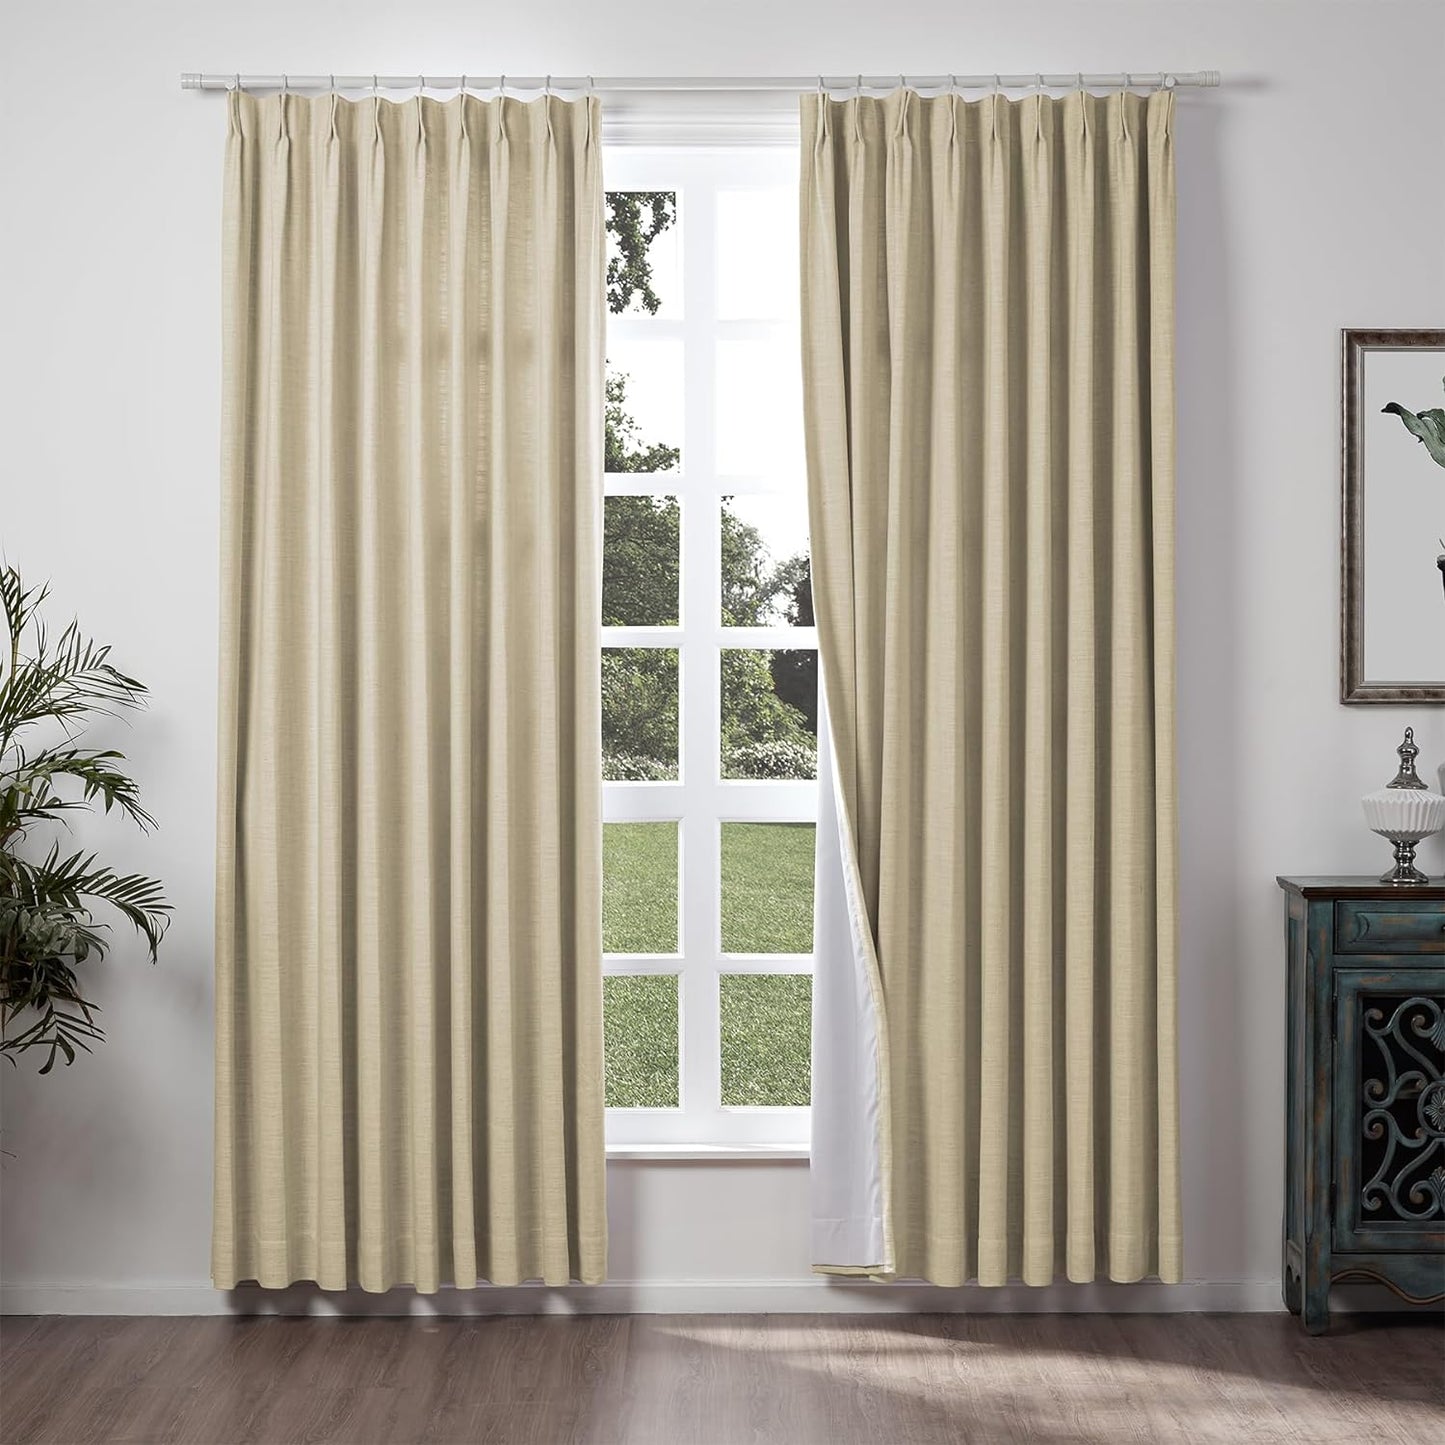 Chadmade 50" W X 63" L Polyester Linen Drape with Blackout Lining Pinch Pleat Curtain for Sliding Door Patio Door Living Room Bedroom, (1 Panel) Sand Beige Tallis Collection  ChadMade Lt Khaki (4) 120Wx96L 